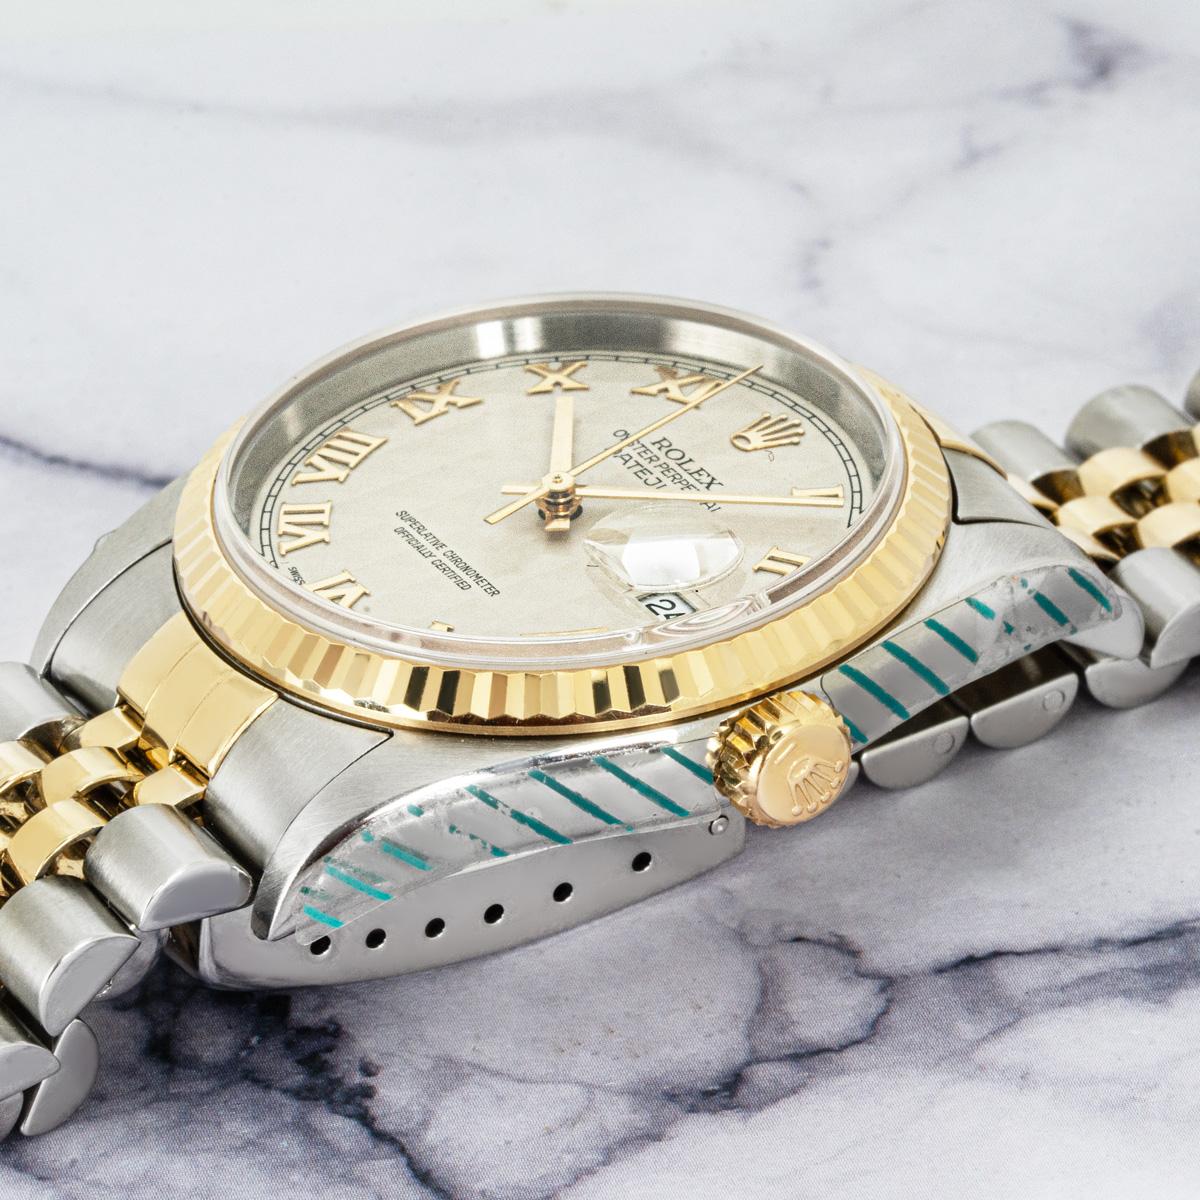 A classic 36mm Datejust by Rolex in stainless steel and yellow gold. Featuring an ivory pyramid dial with Roman numerals and a fluted yellow gold bezel. The Jubilee bracelet features a folding Oysterclasp. Fitted with scratch-resistant sapphire